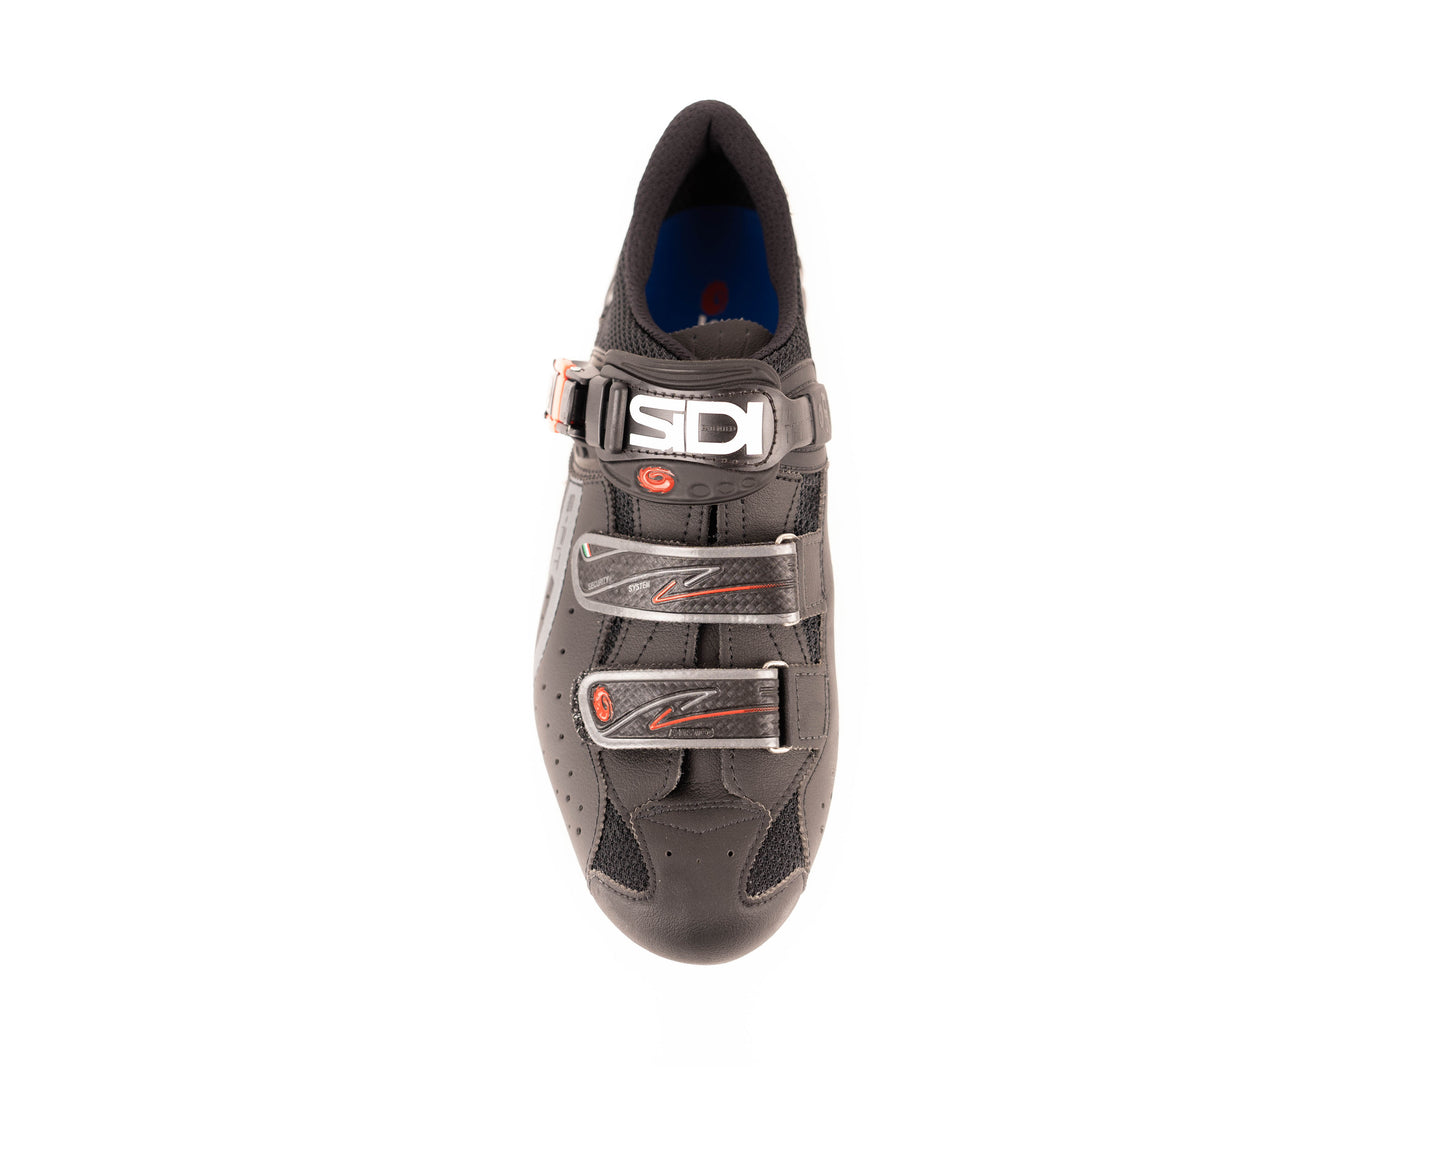 Sidi Dominator Fit Shoe Black 44 Right ONLY